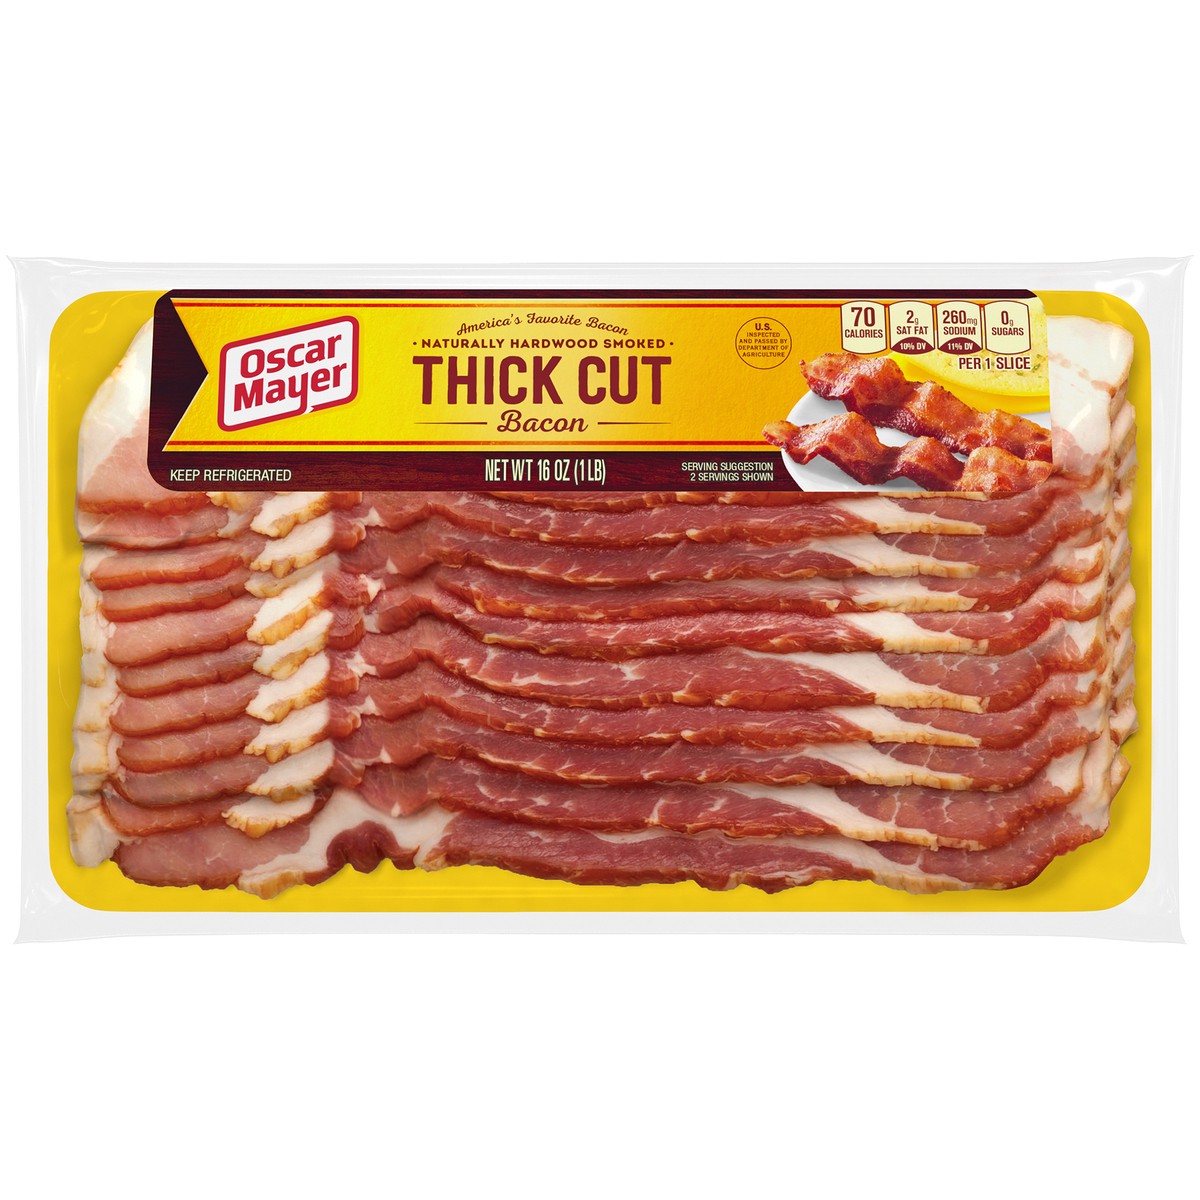 slide 6 of 15, Oscar Mayer Naturally Hardwood Smoked Thick Cut Bacon, 16 oz Pack, 11-13 slices, 16 oz